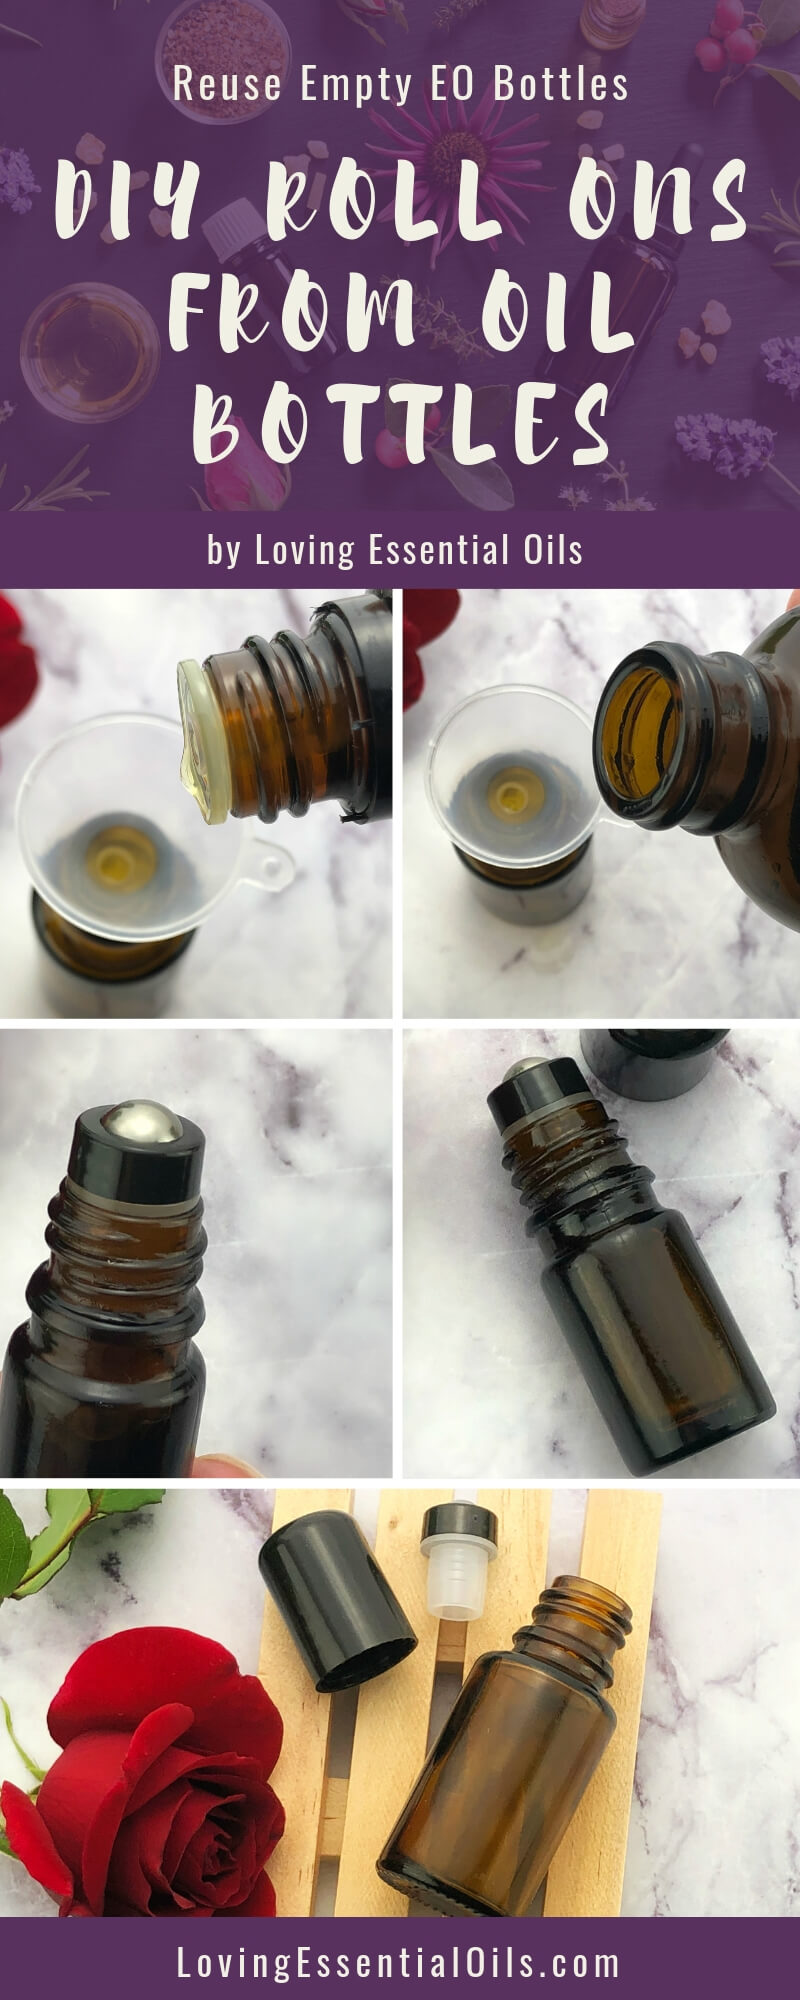 How to Make DIY Roll Ons From Empty Essential Oil Bottles by Loving Essential Oils | Transform your empty essential oil bottles into DIY Roll Ons!